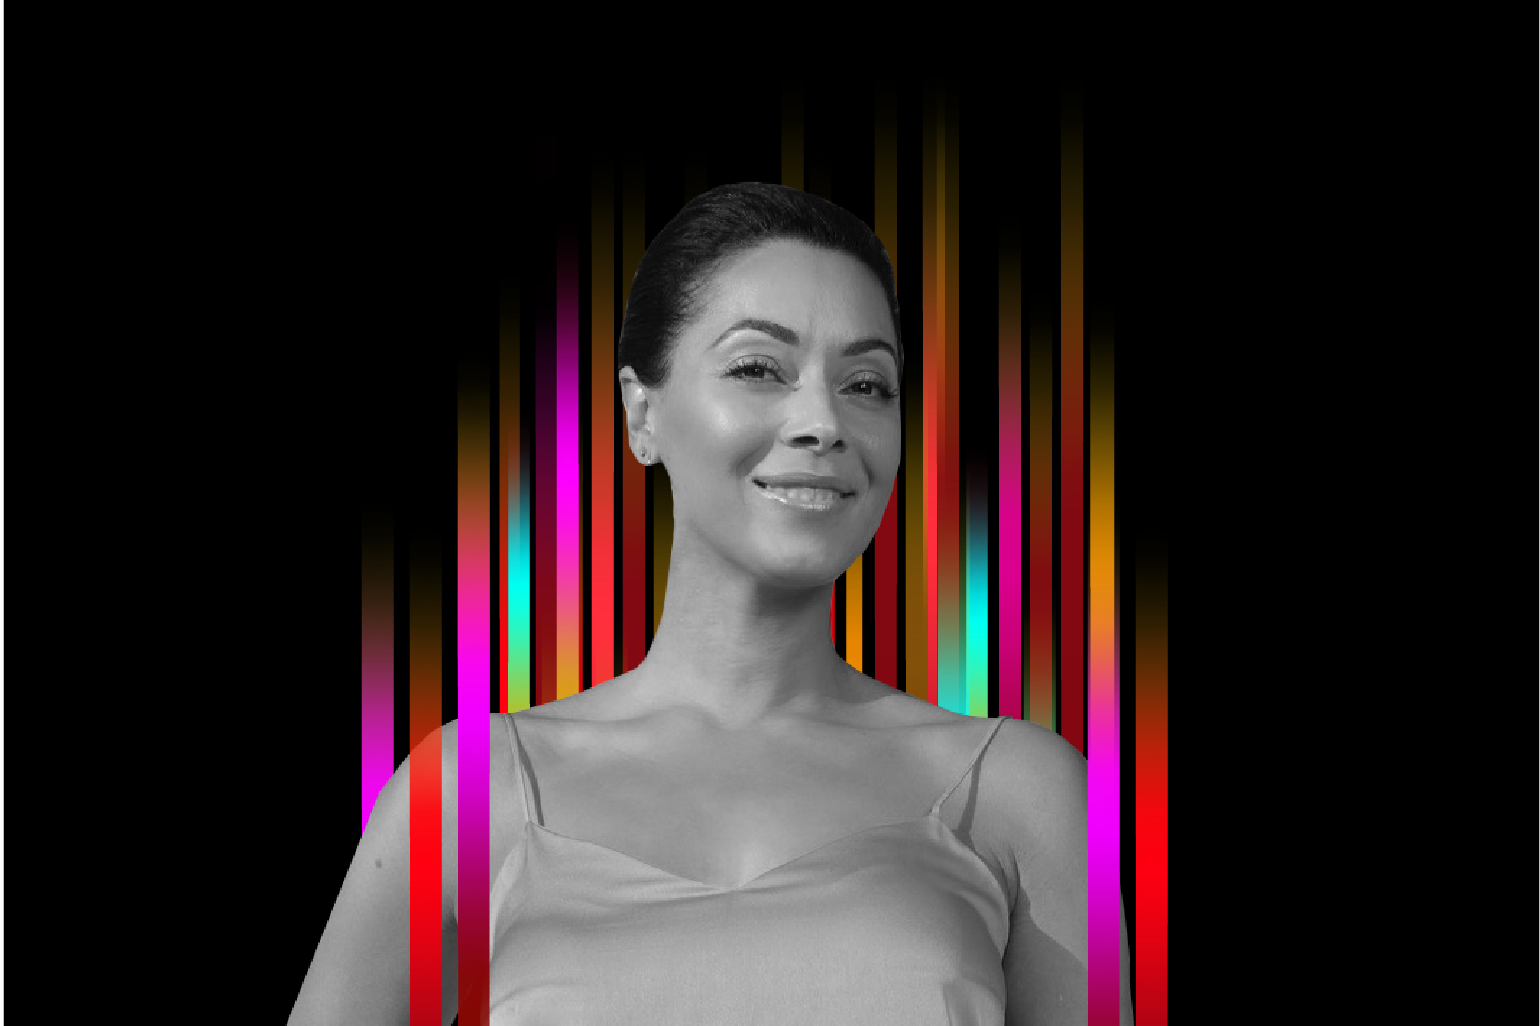 On the middle of a black background is a row of colourful vertical stripes’. In the centre is a black and white profile photo of TEDx speaker Jessica Huie superimposed on top.